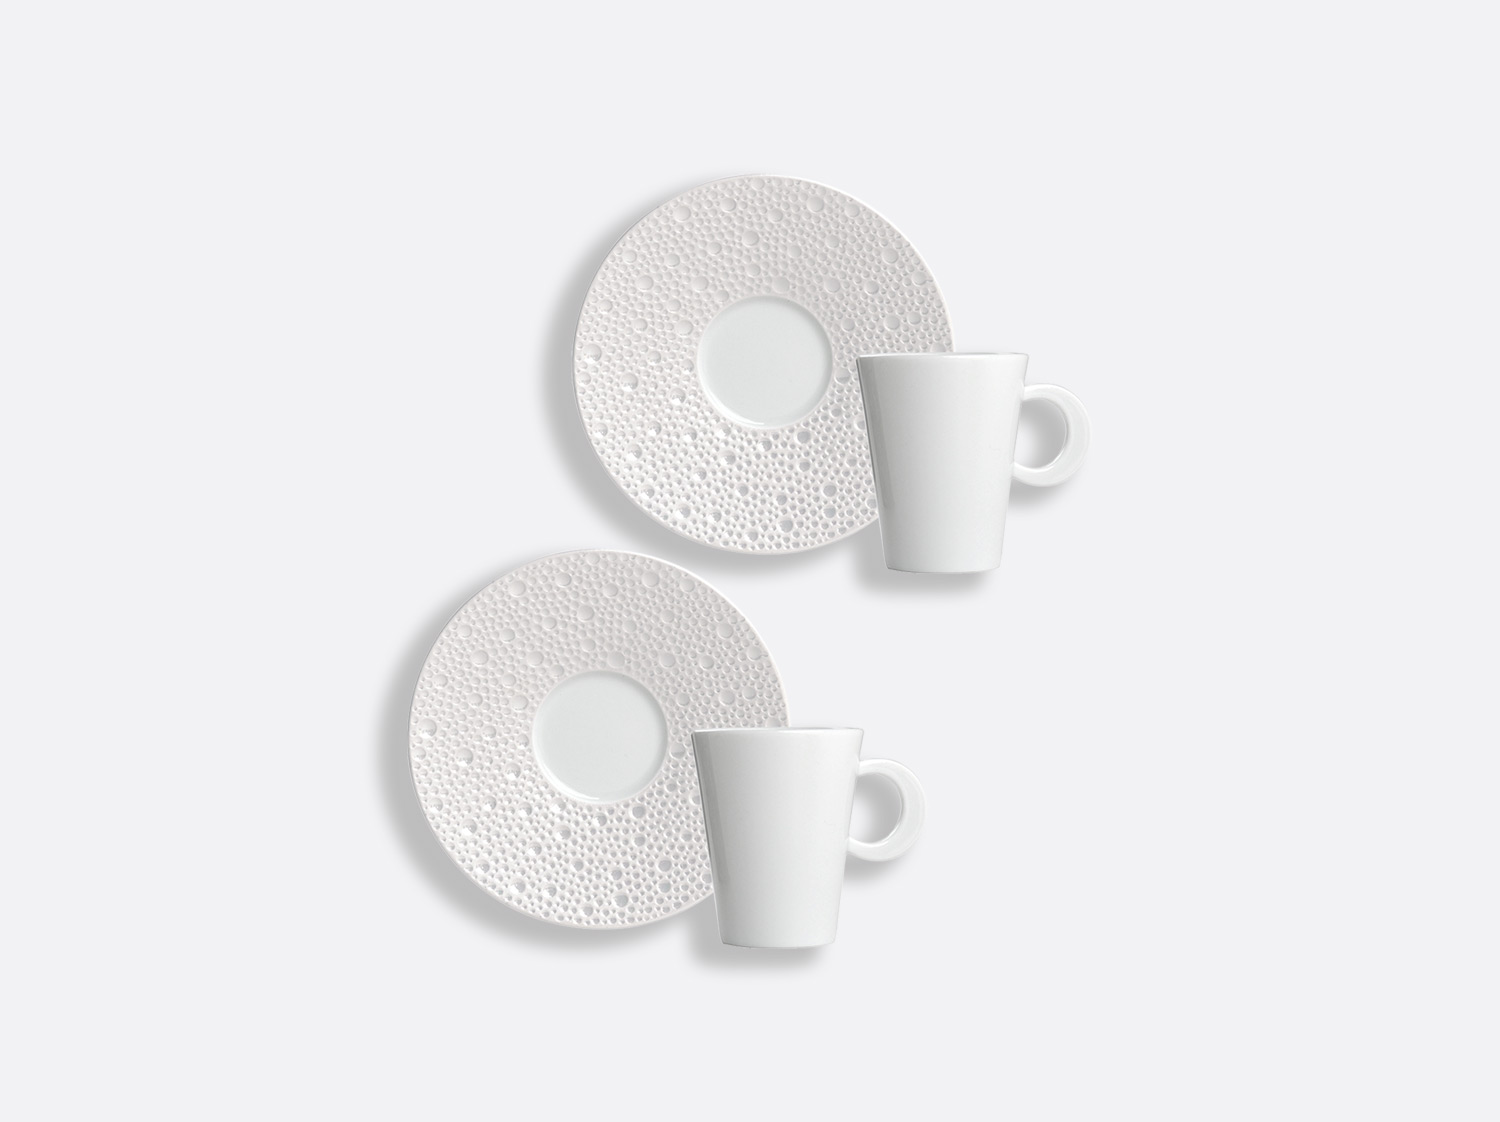 China Set of espresso cups and saucers 2 oz - Set of 2 of the collection Écume Perle | Bernardaud